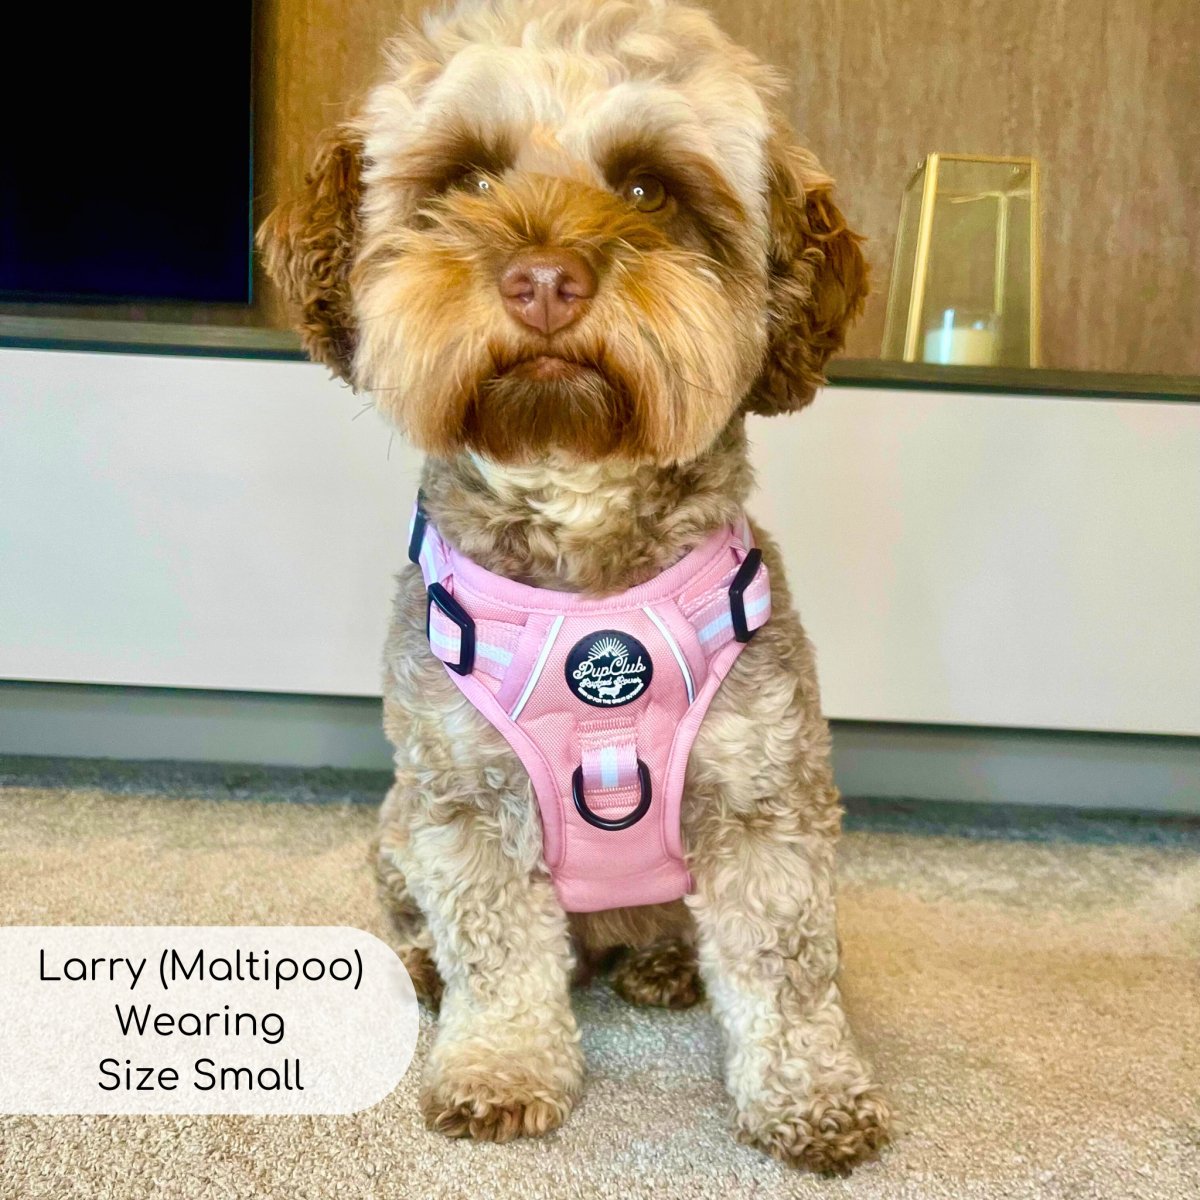 Maltipoo wearing small pastel pink rugged rover dog harness from Pupclub Couture